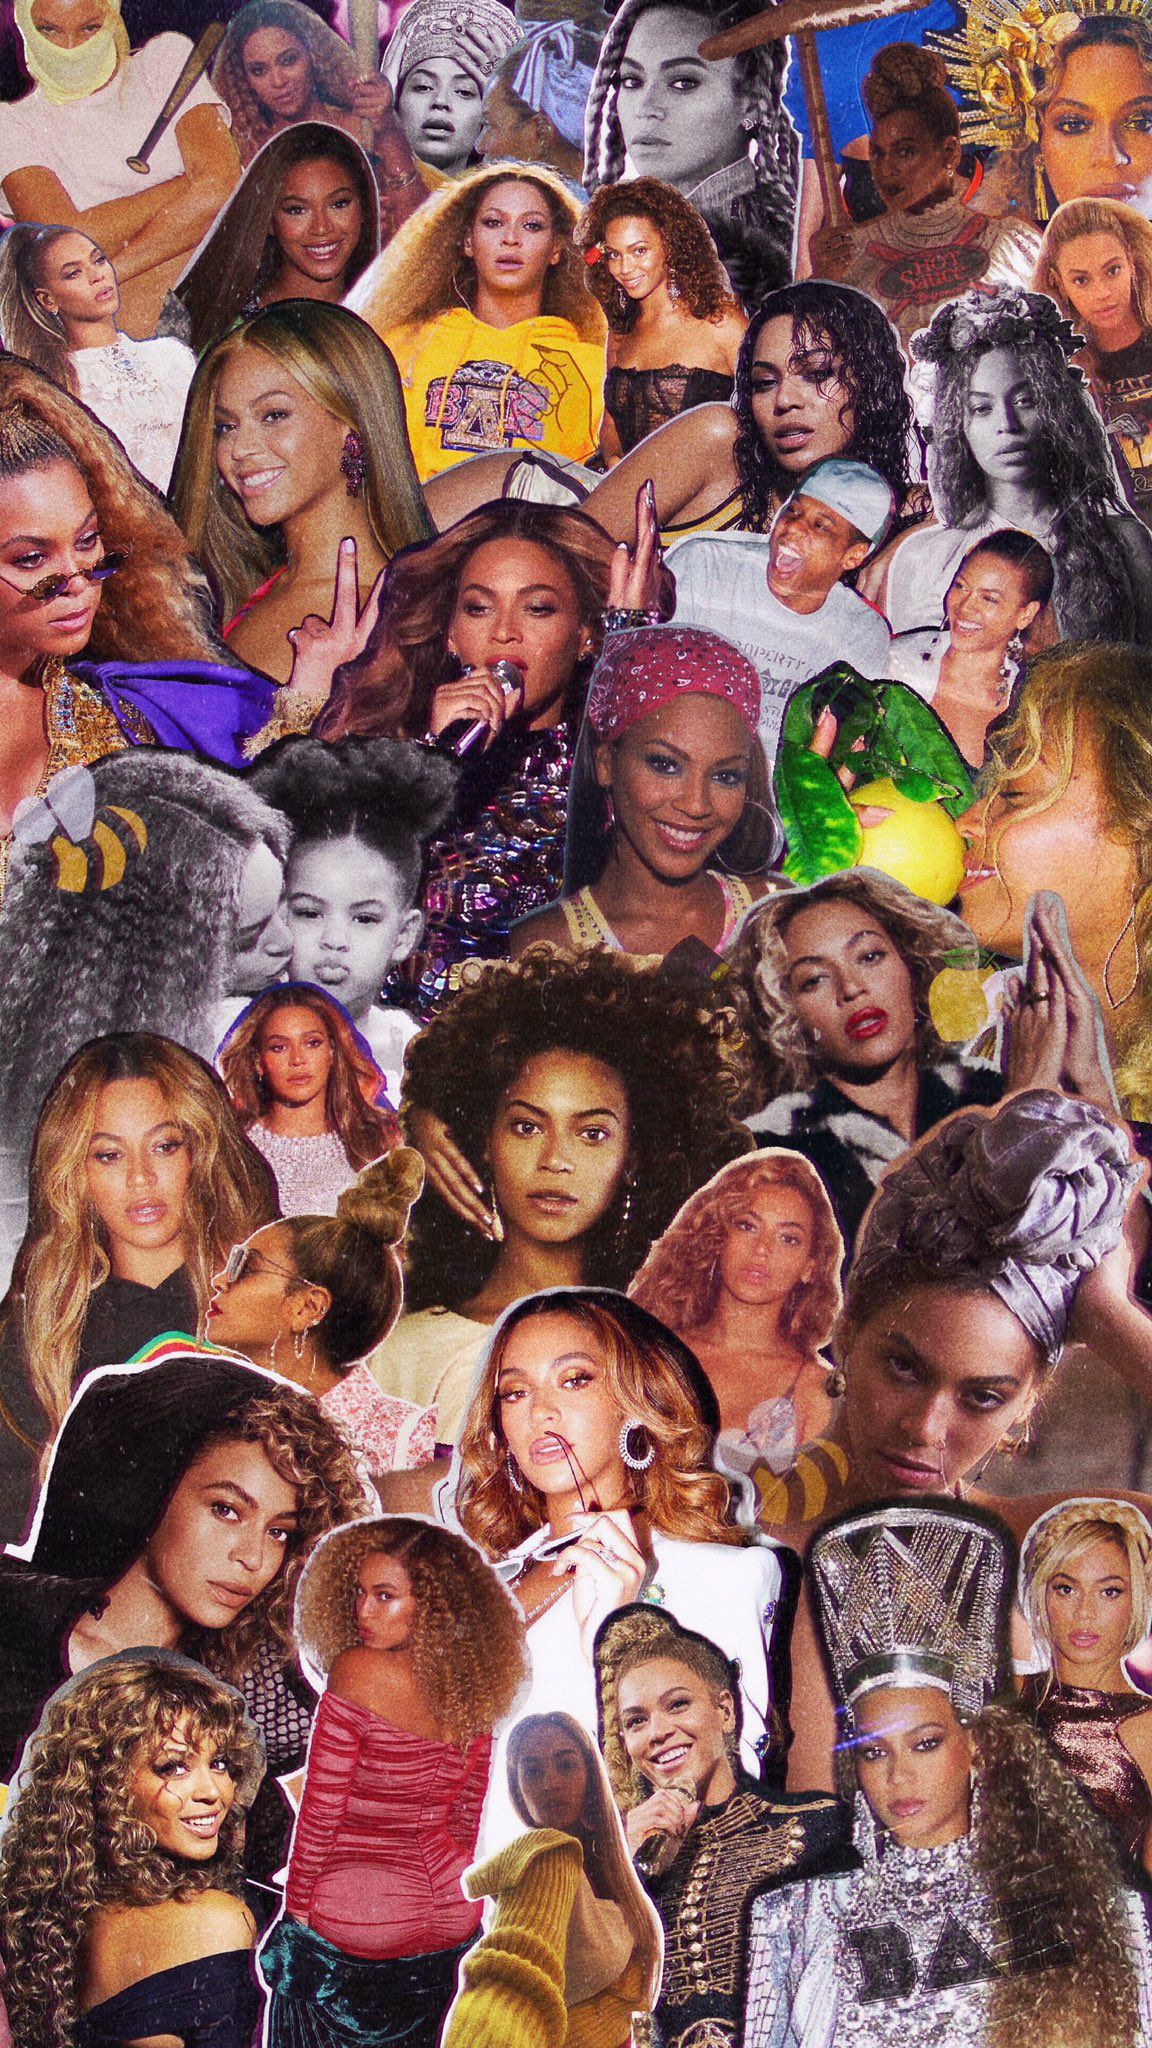 A collage of pictures with many different people - Beyonce